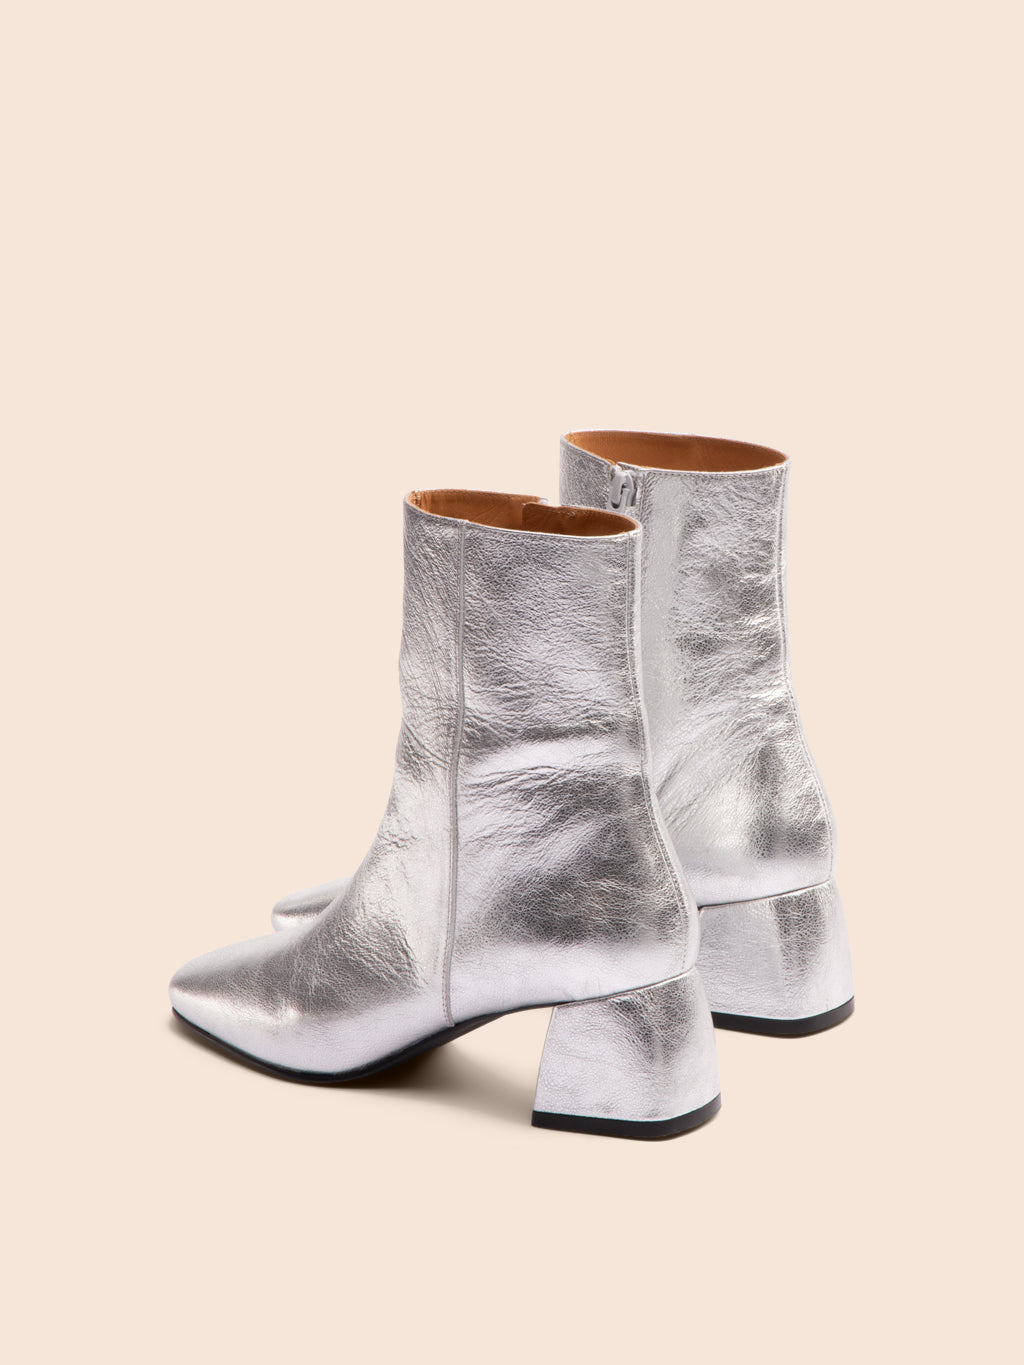 Maguire Salento Leather Heeled Boots - Silver